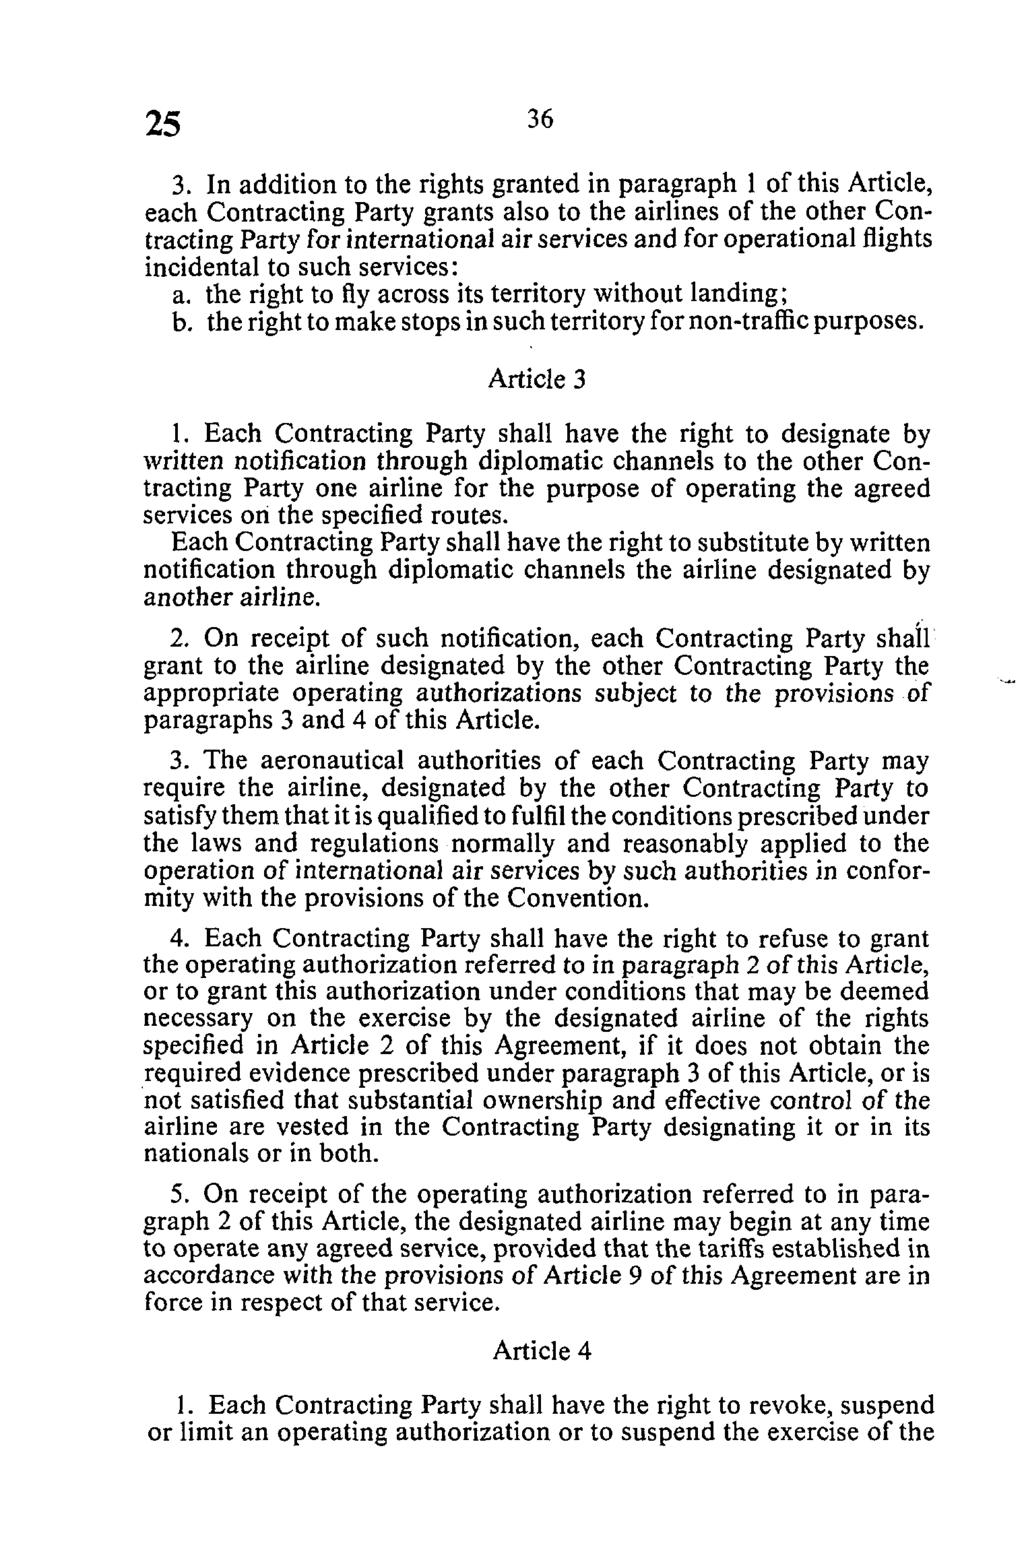 3. In addition to the rights granted in paragraph 1 of this Article, each Contracting Party grants also to the airlines of the other Contracting Party for international air services and for